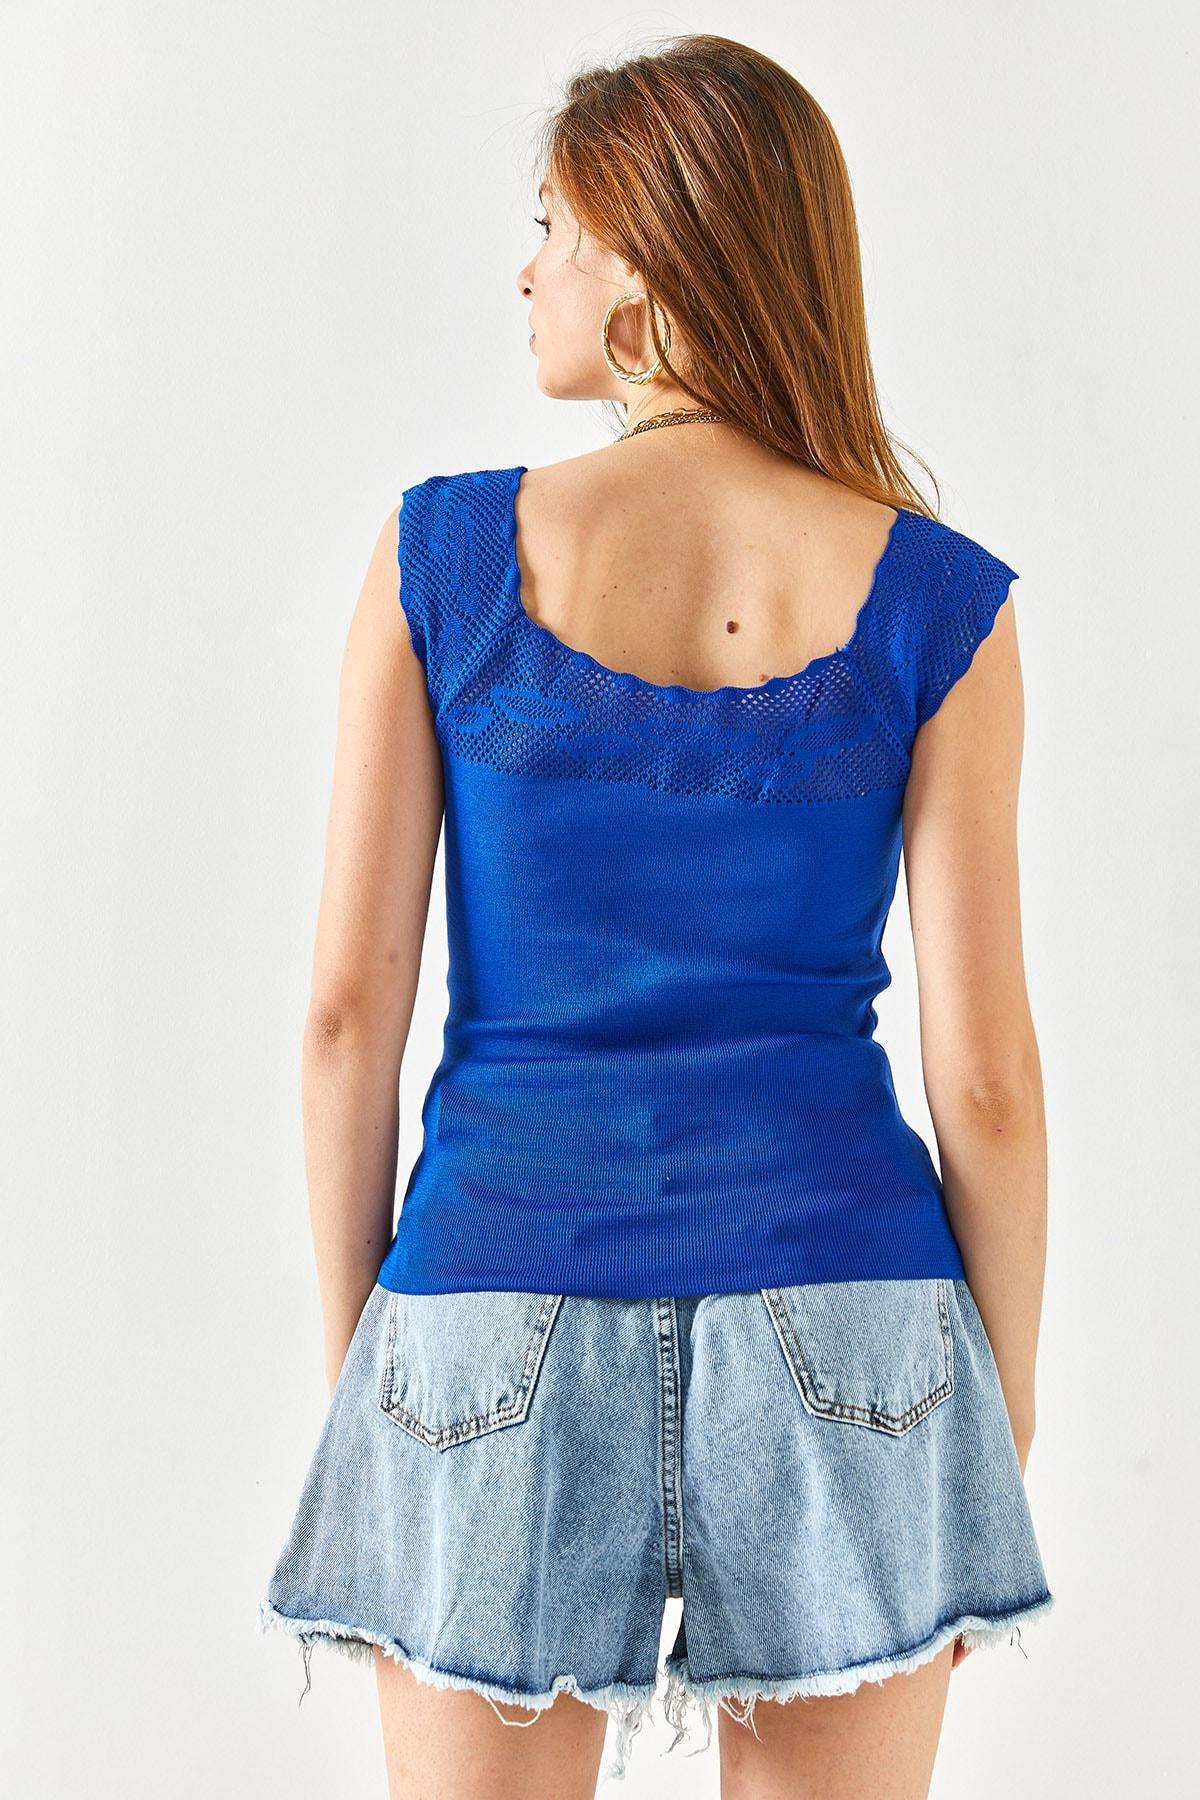 Olalook - Blue Openwork Knitted Blouse